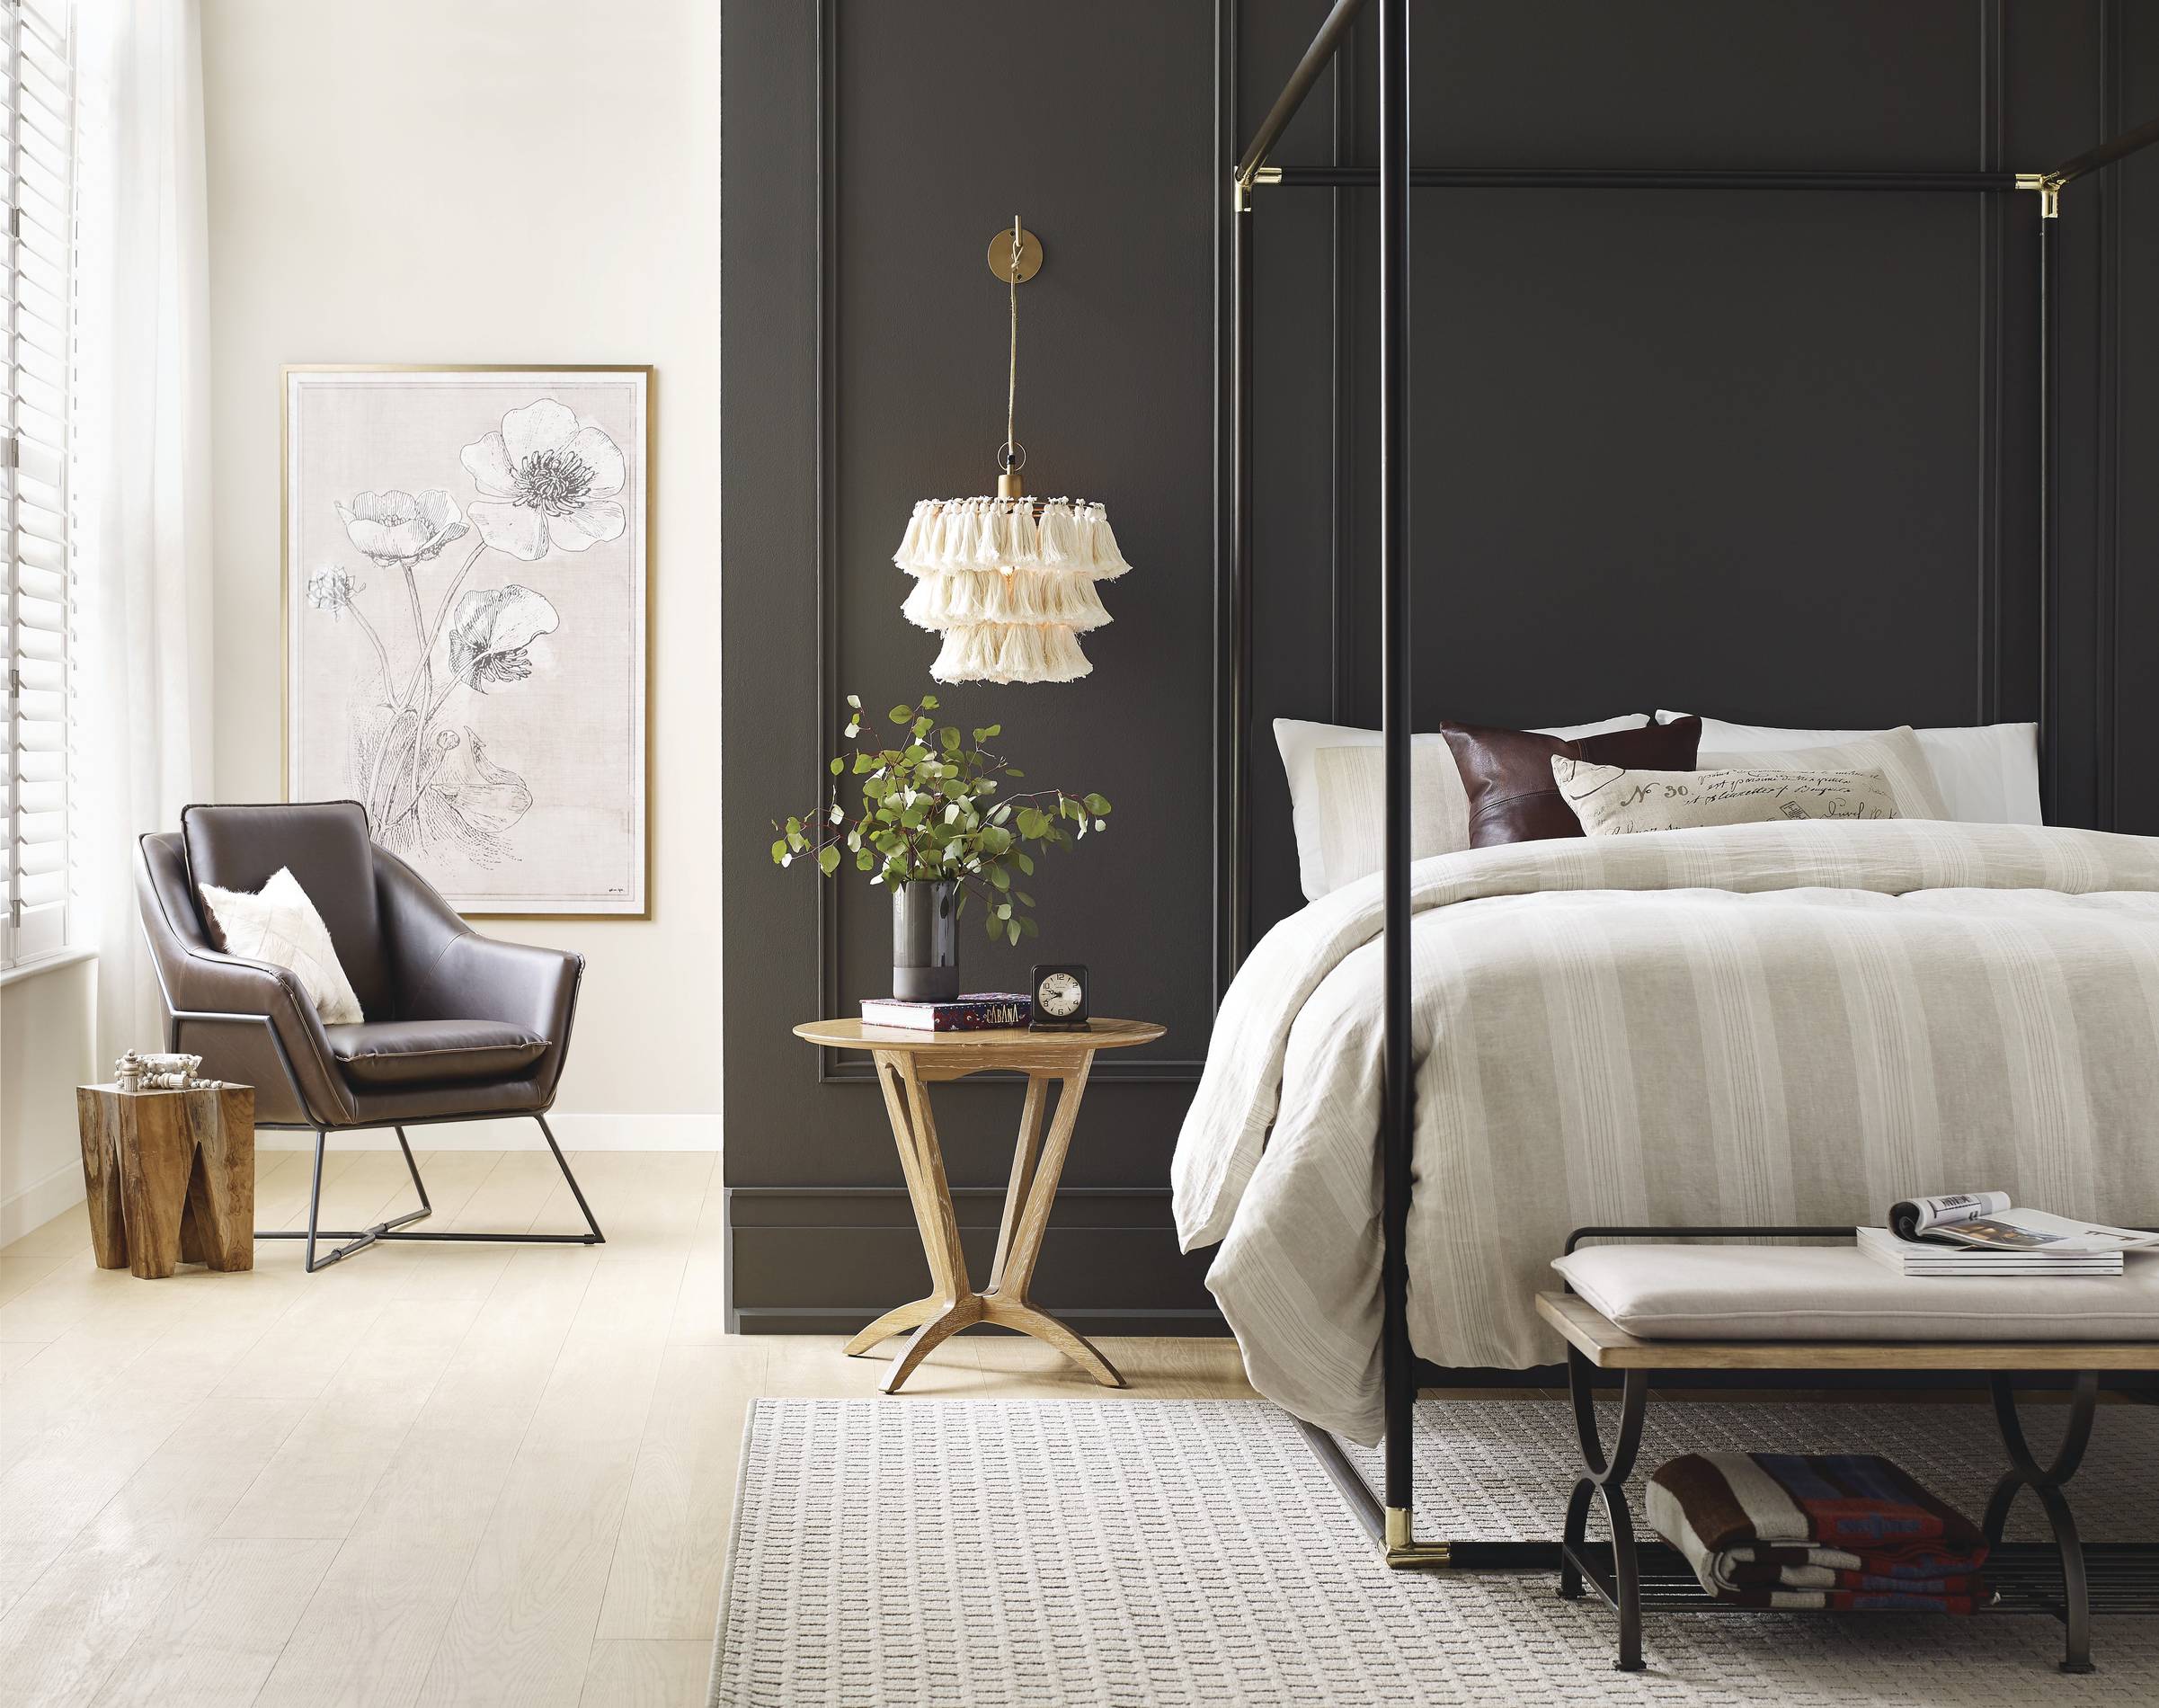 The Sherwin-Williams Color of the Year 2021 is Urbane Bronze